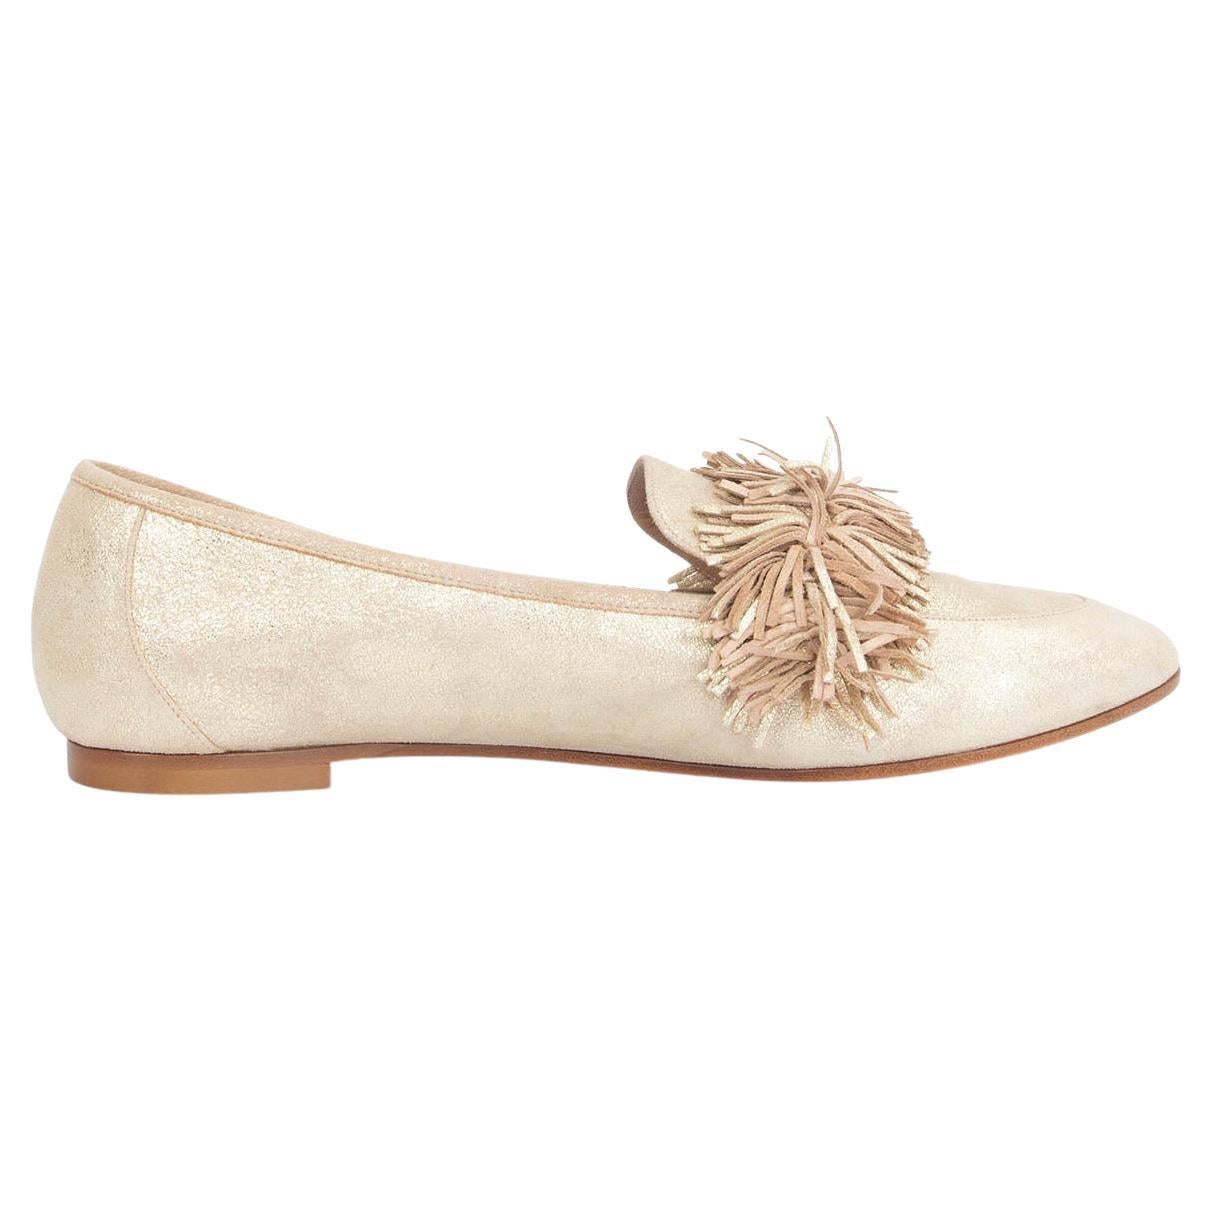 AQUAZZURA light gold suede WILD THING Loafers Flats Shoes 40